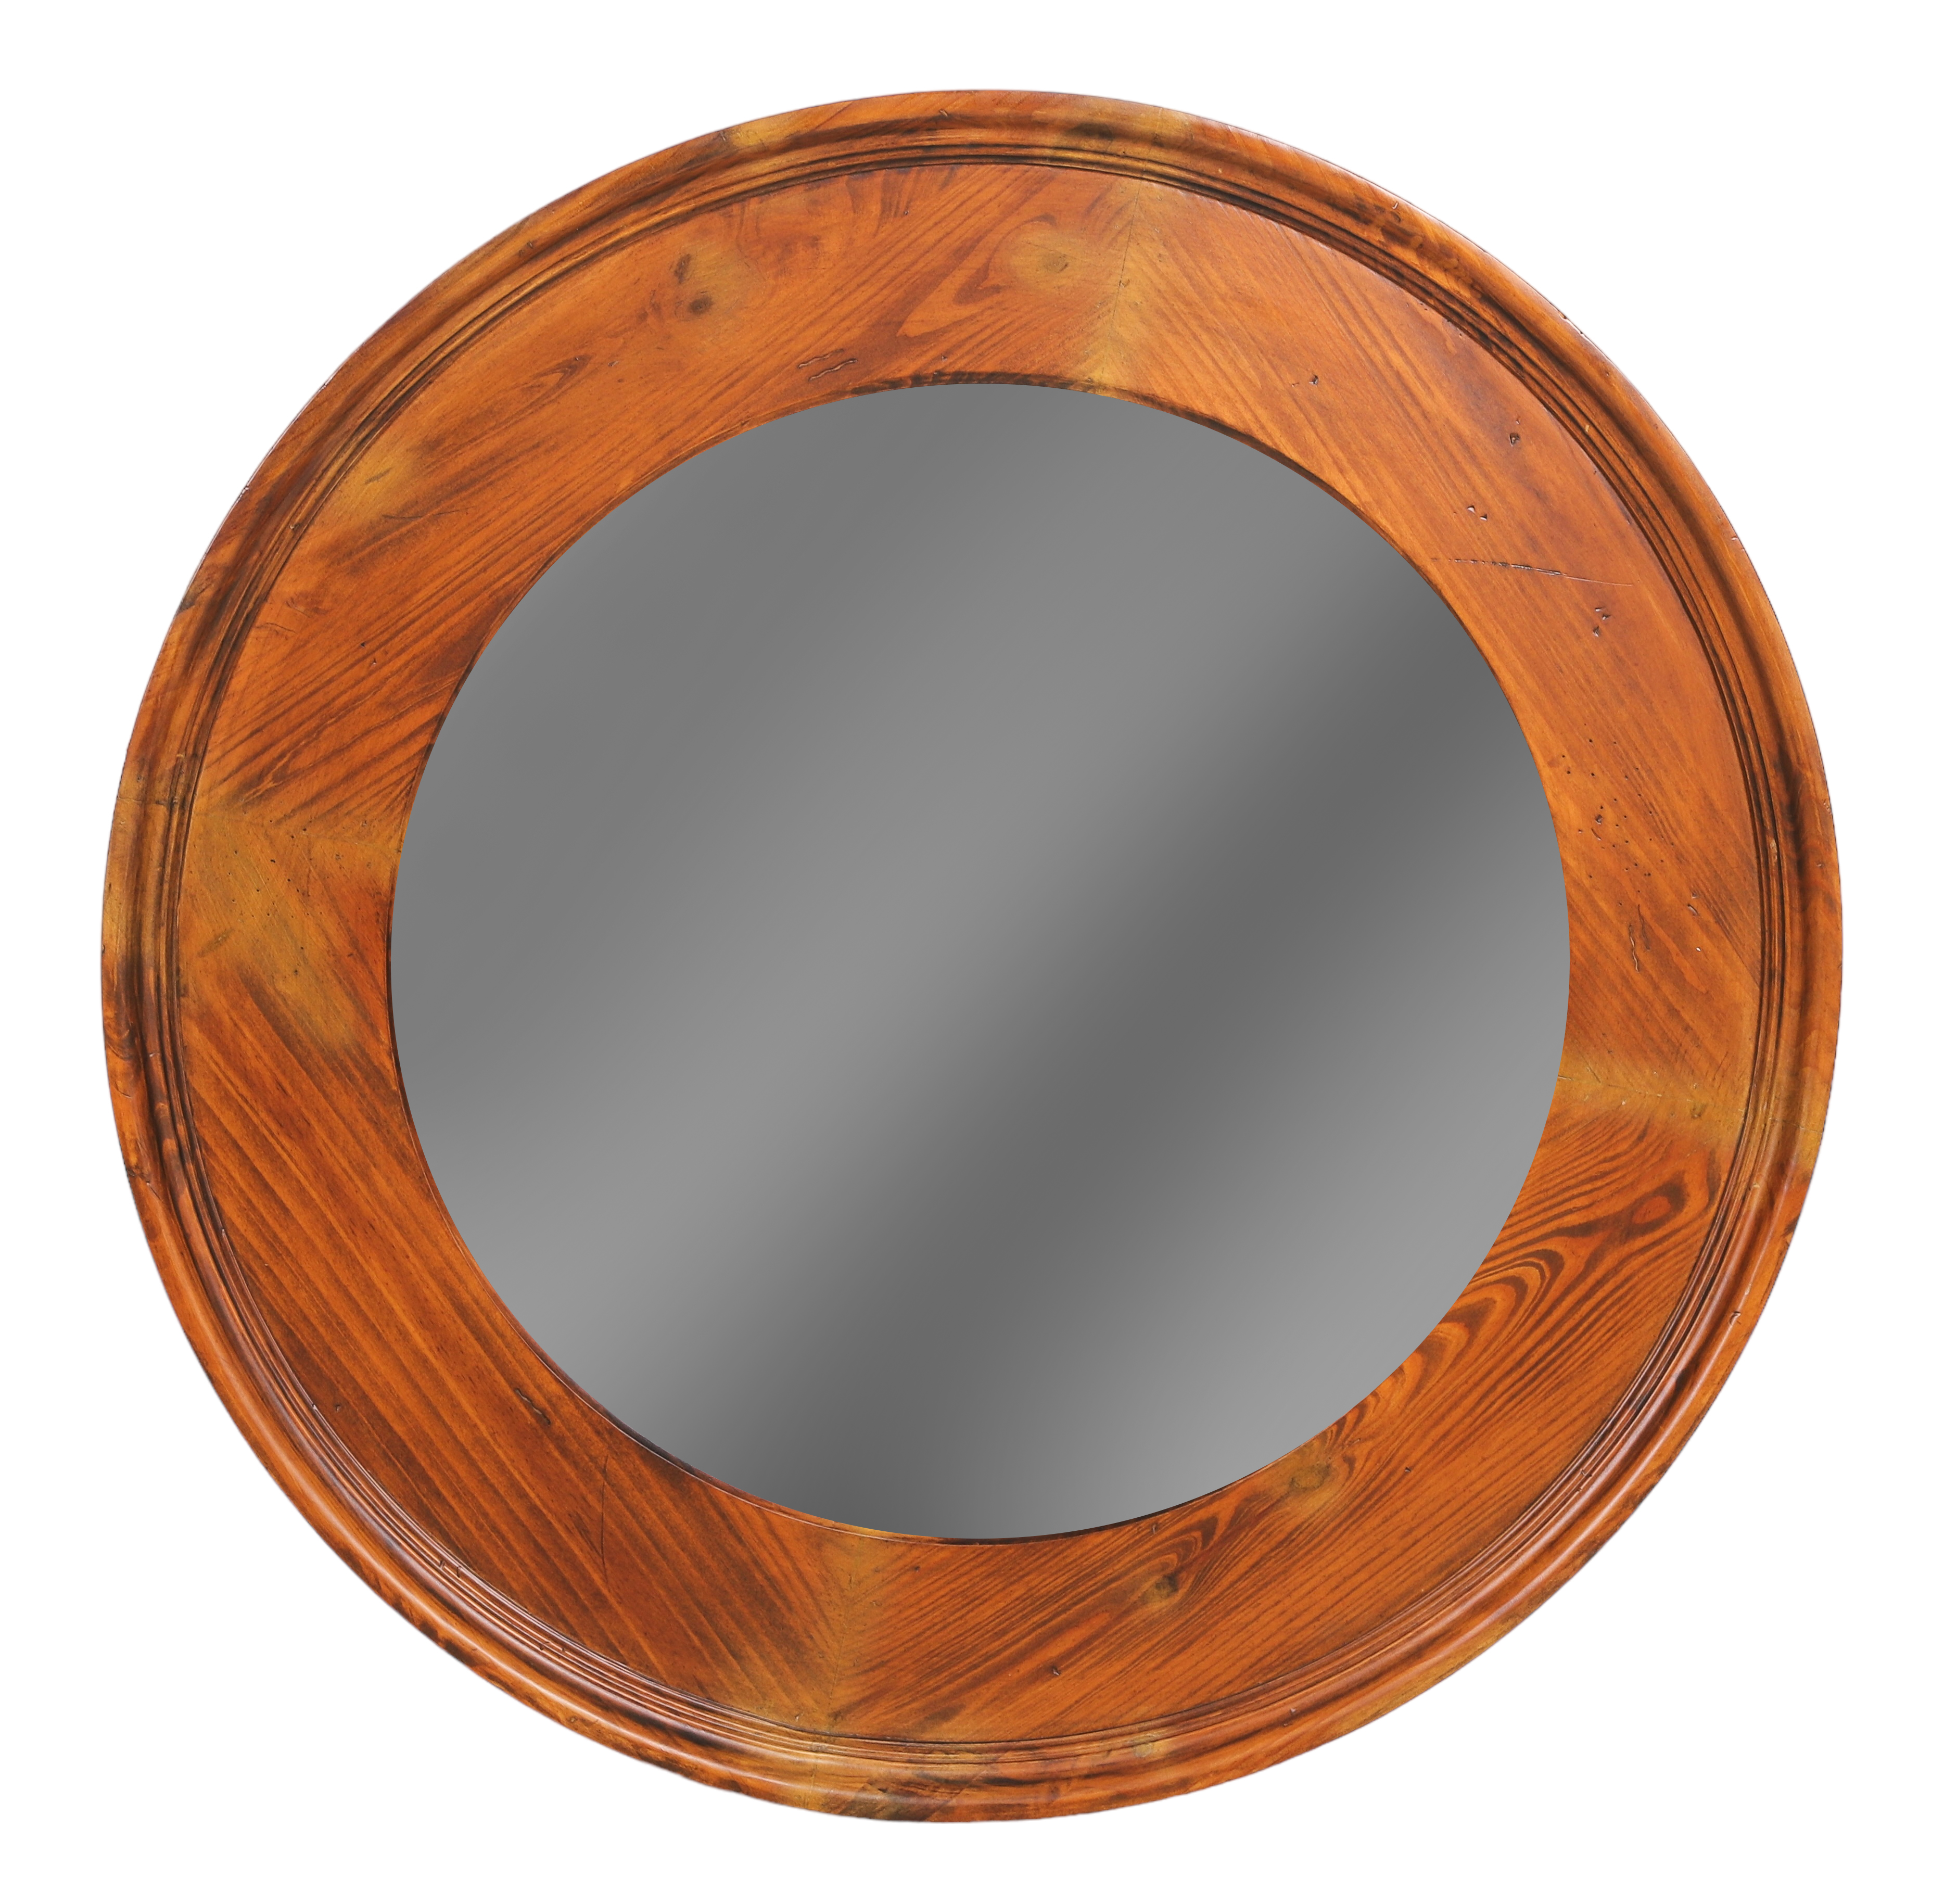 Oak carved round hanging wall mirror  3b0ecf